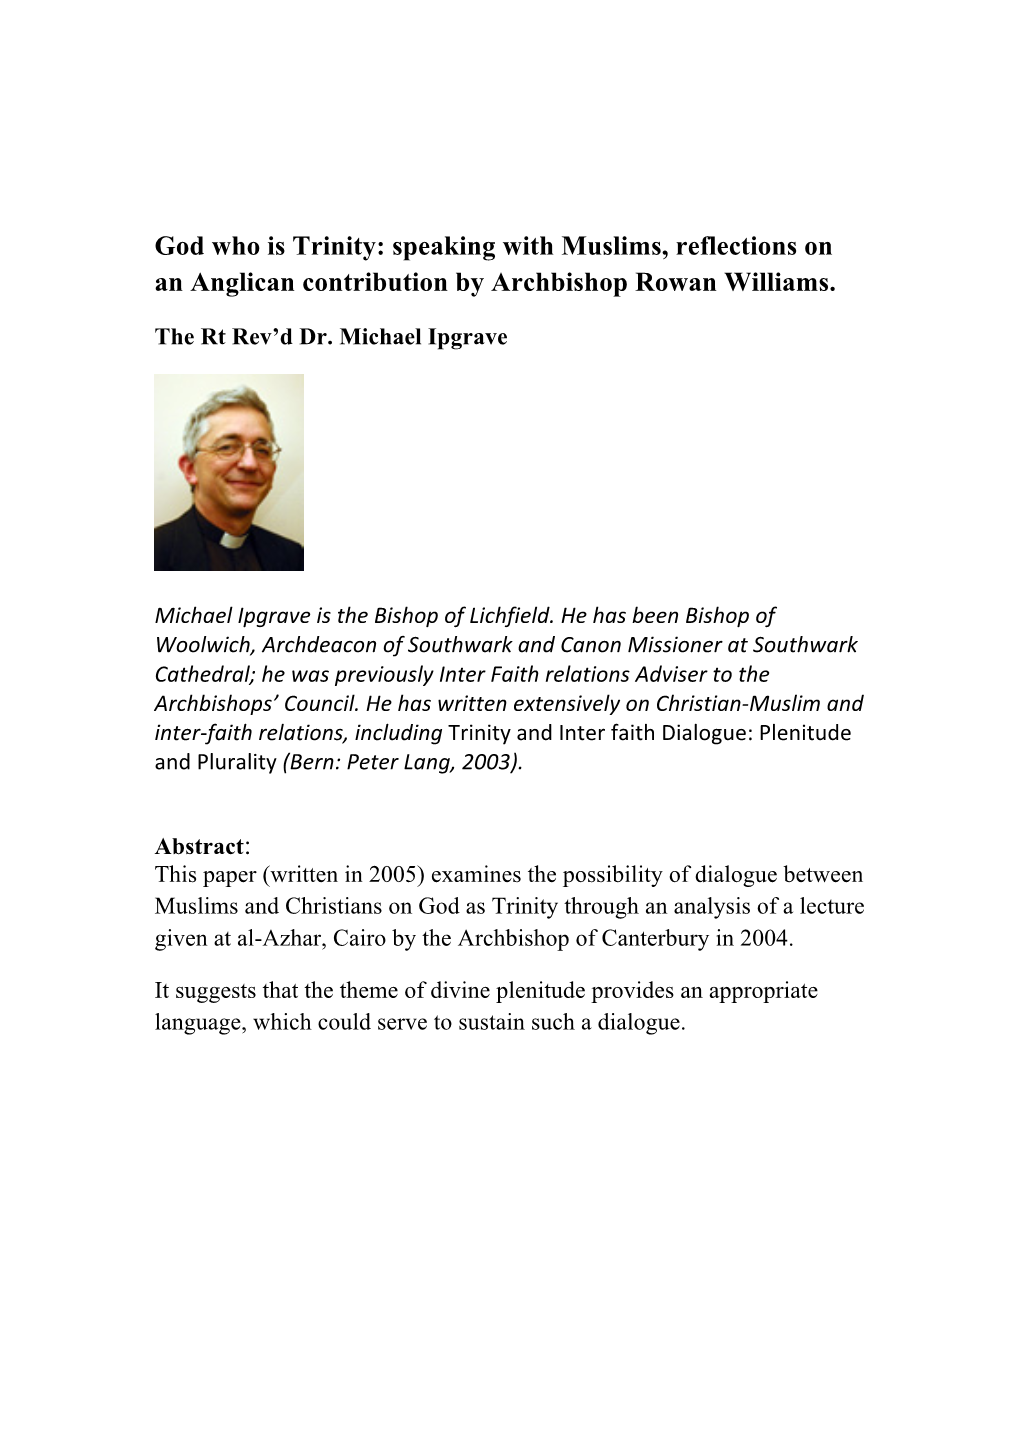 God Who Is Trinity: Speaking with Muslims, Reflections on an Anglican Contribution by Archbishop Rowan Williams